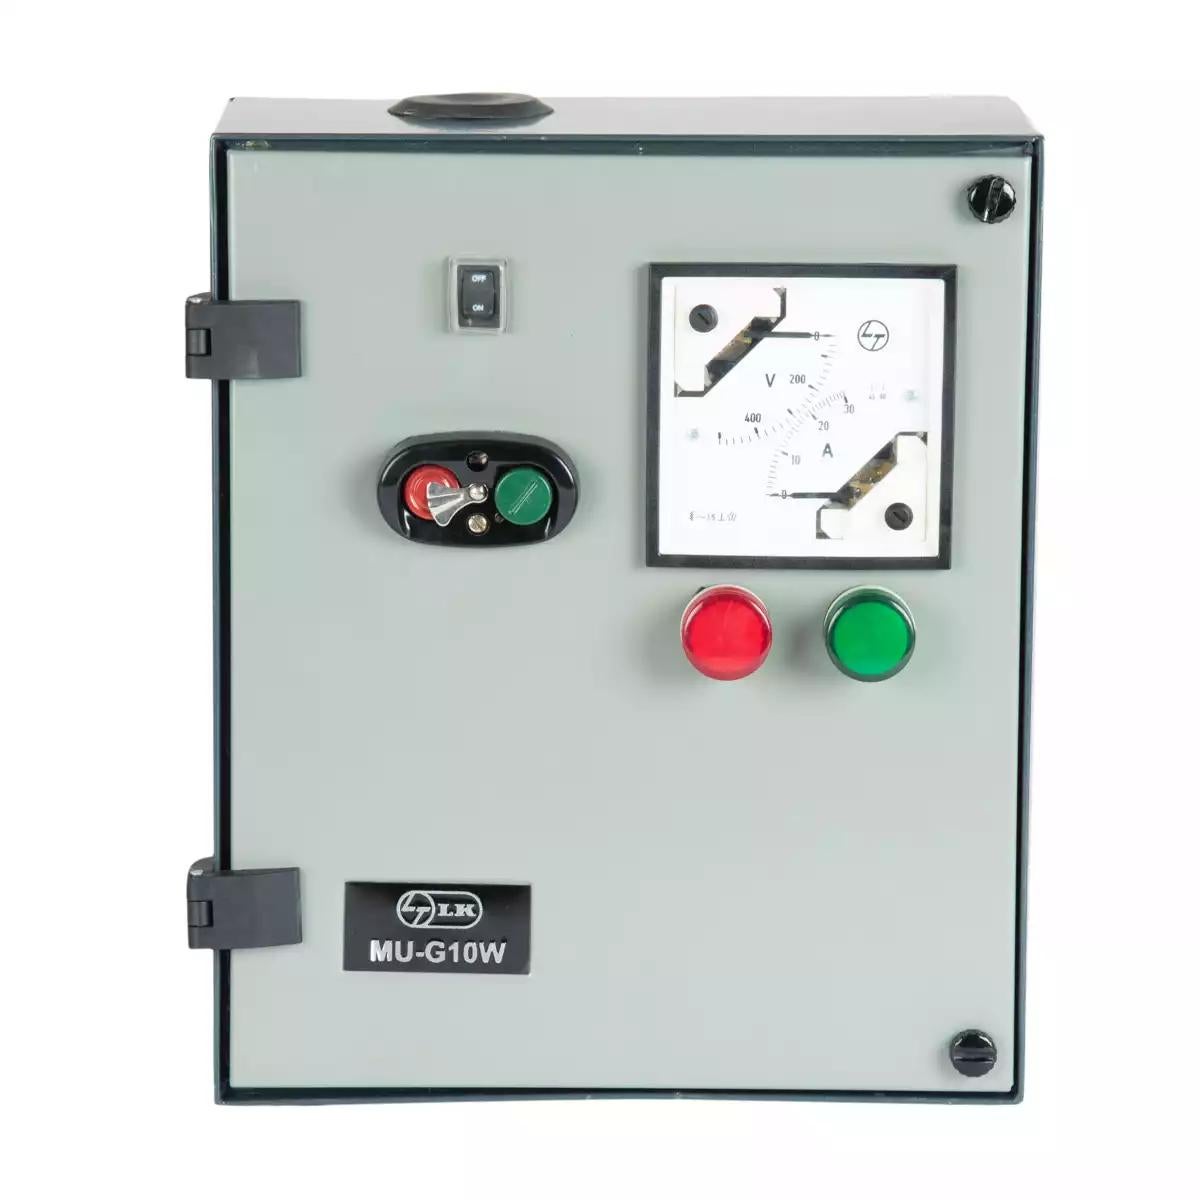 Three Phase DOL Controller with WLC for Submersible Pump Application,MU-G10W,7.5 HP,DOL, CS91037COAO